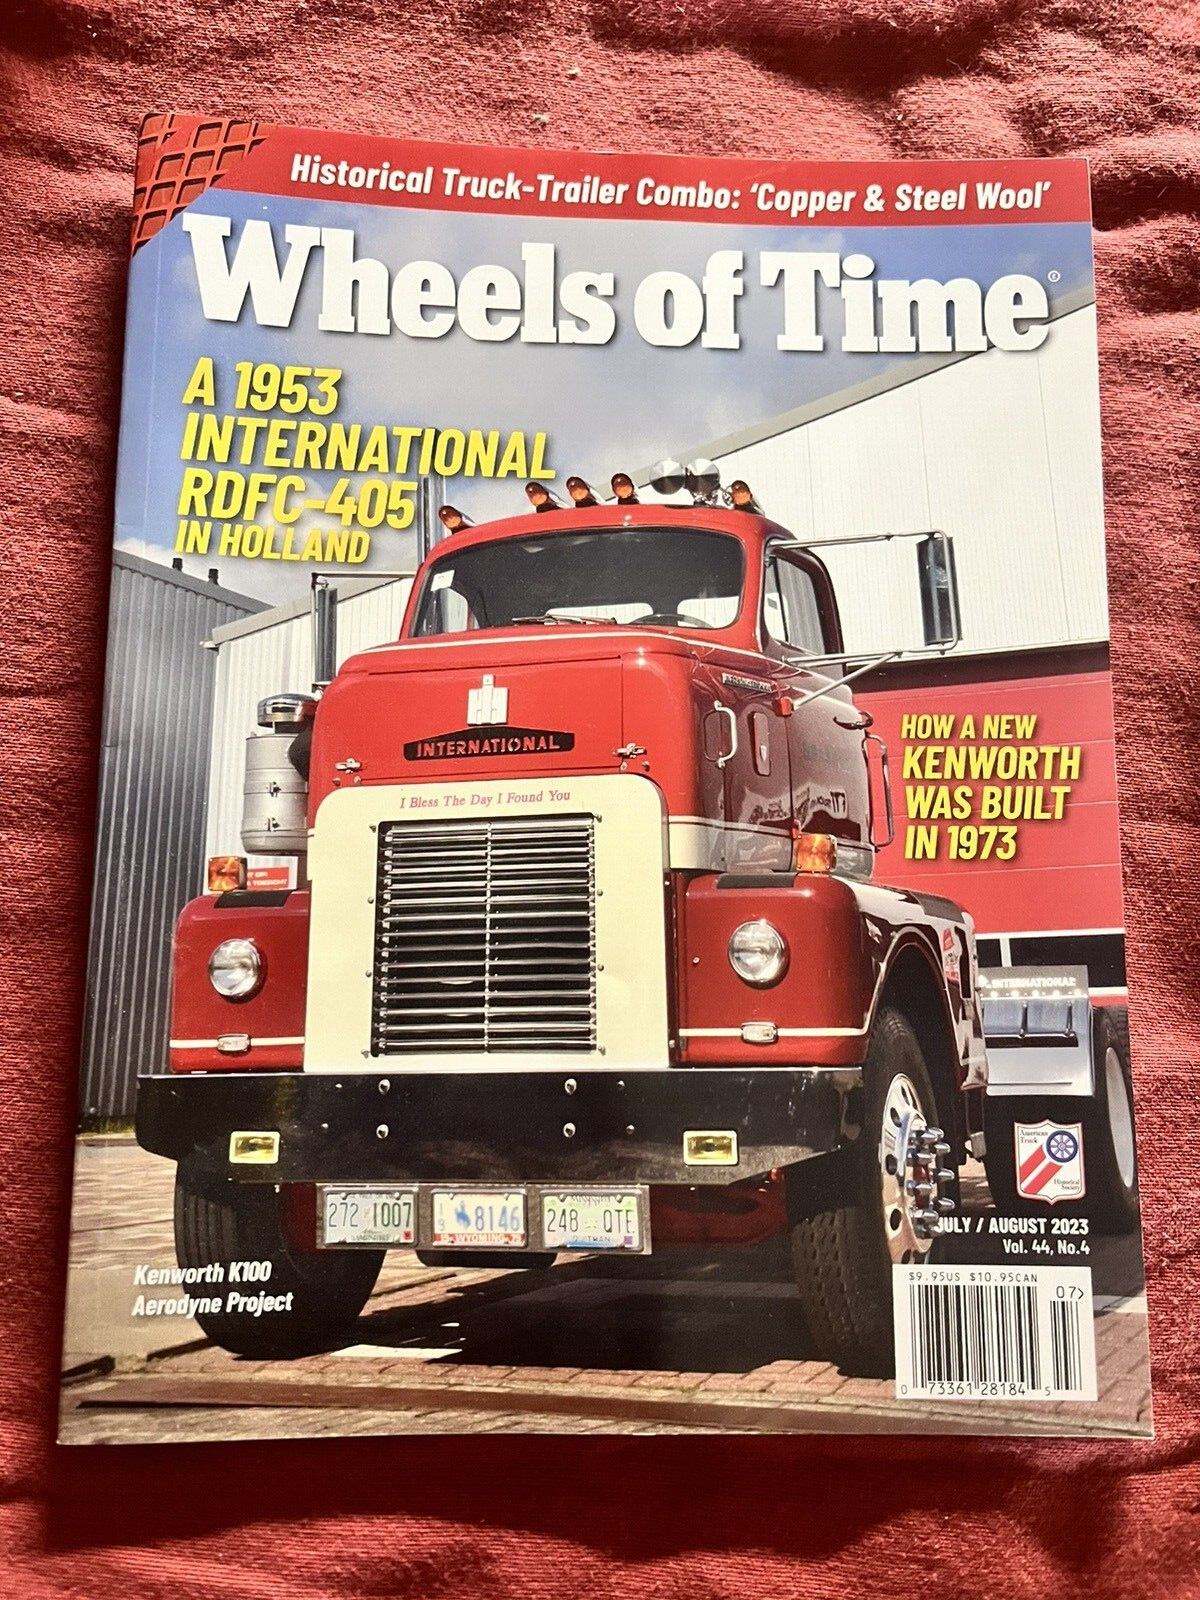 WHEELS OF TIME Truck Magazine ~ July/Aug 2023 - 1953 International RDFC-405